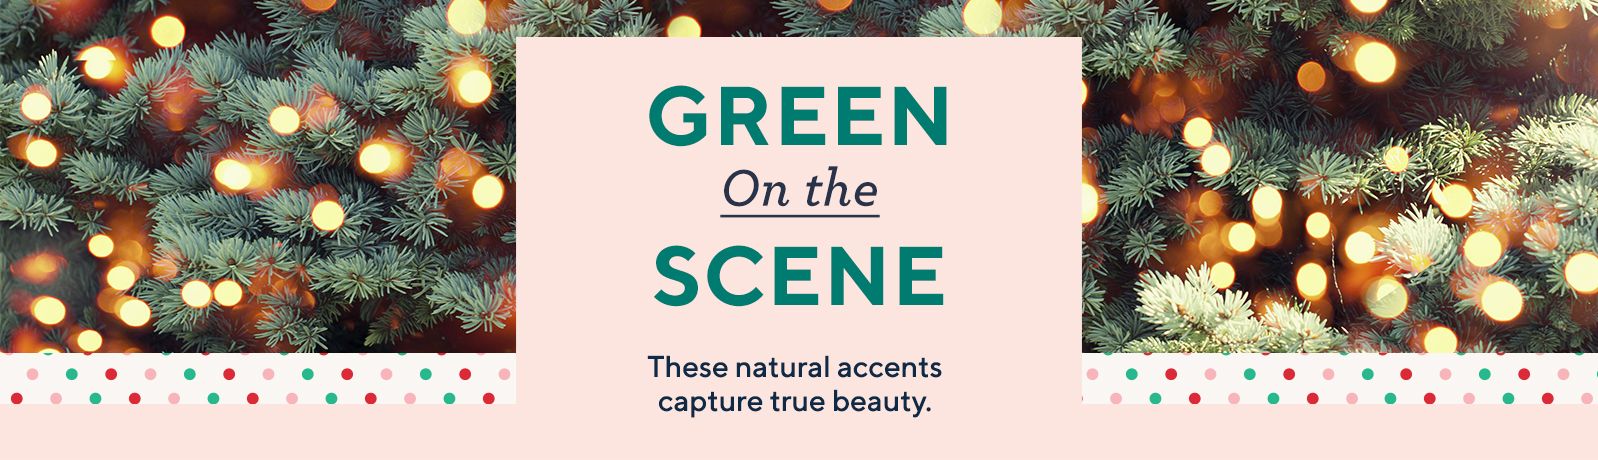 Green On the Scene - These natural accents capture true beauty.